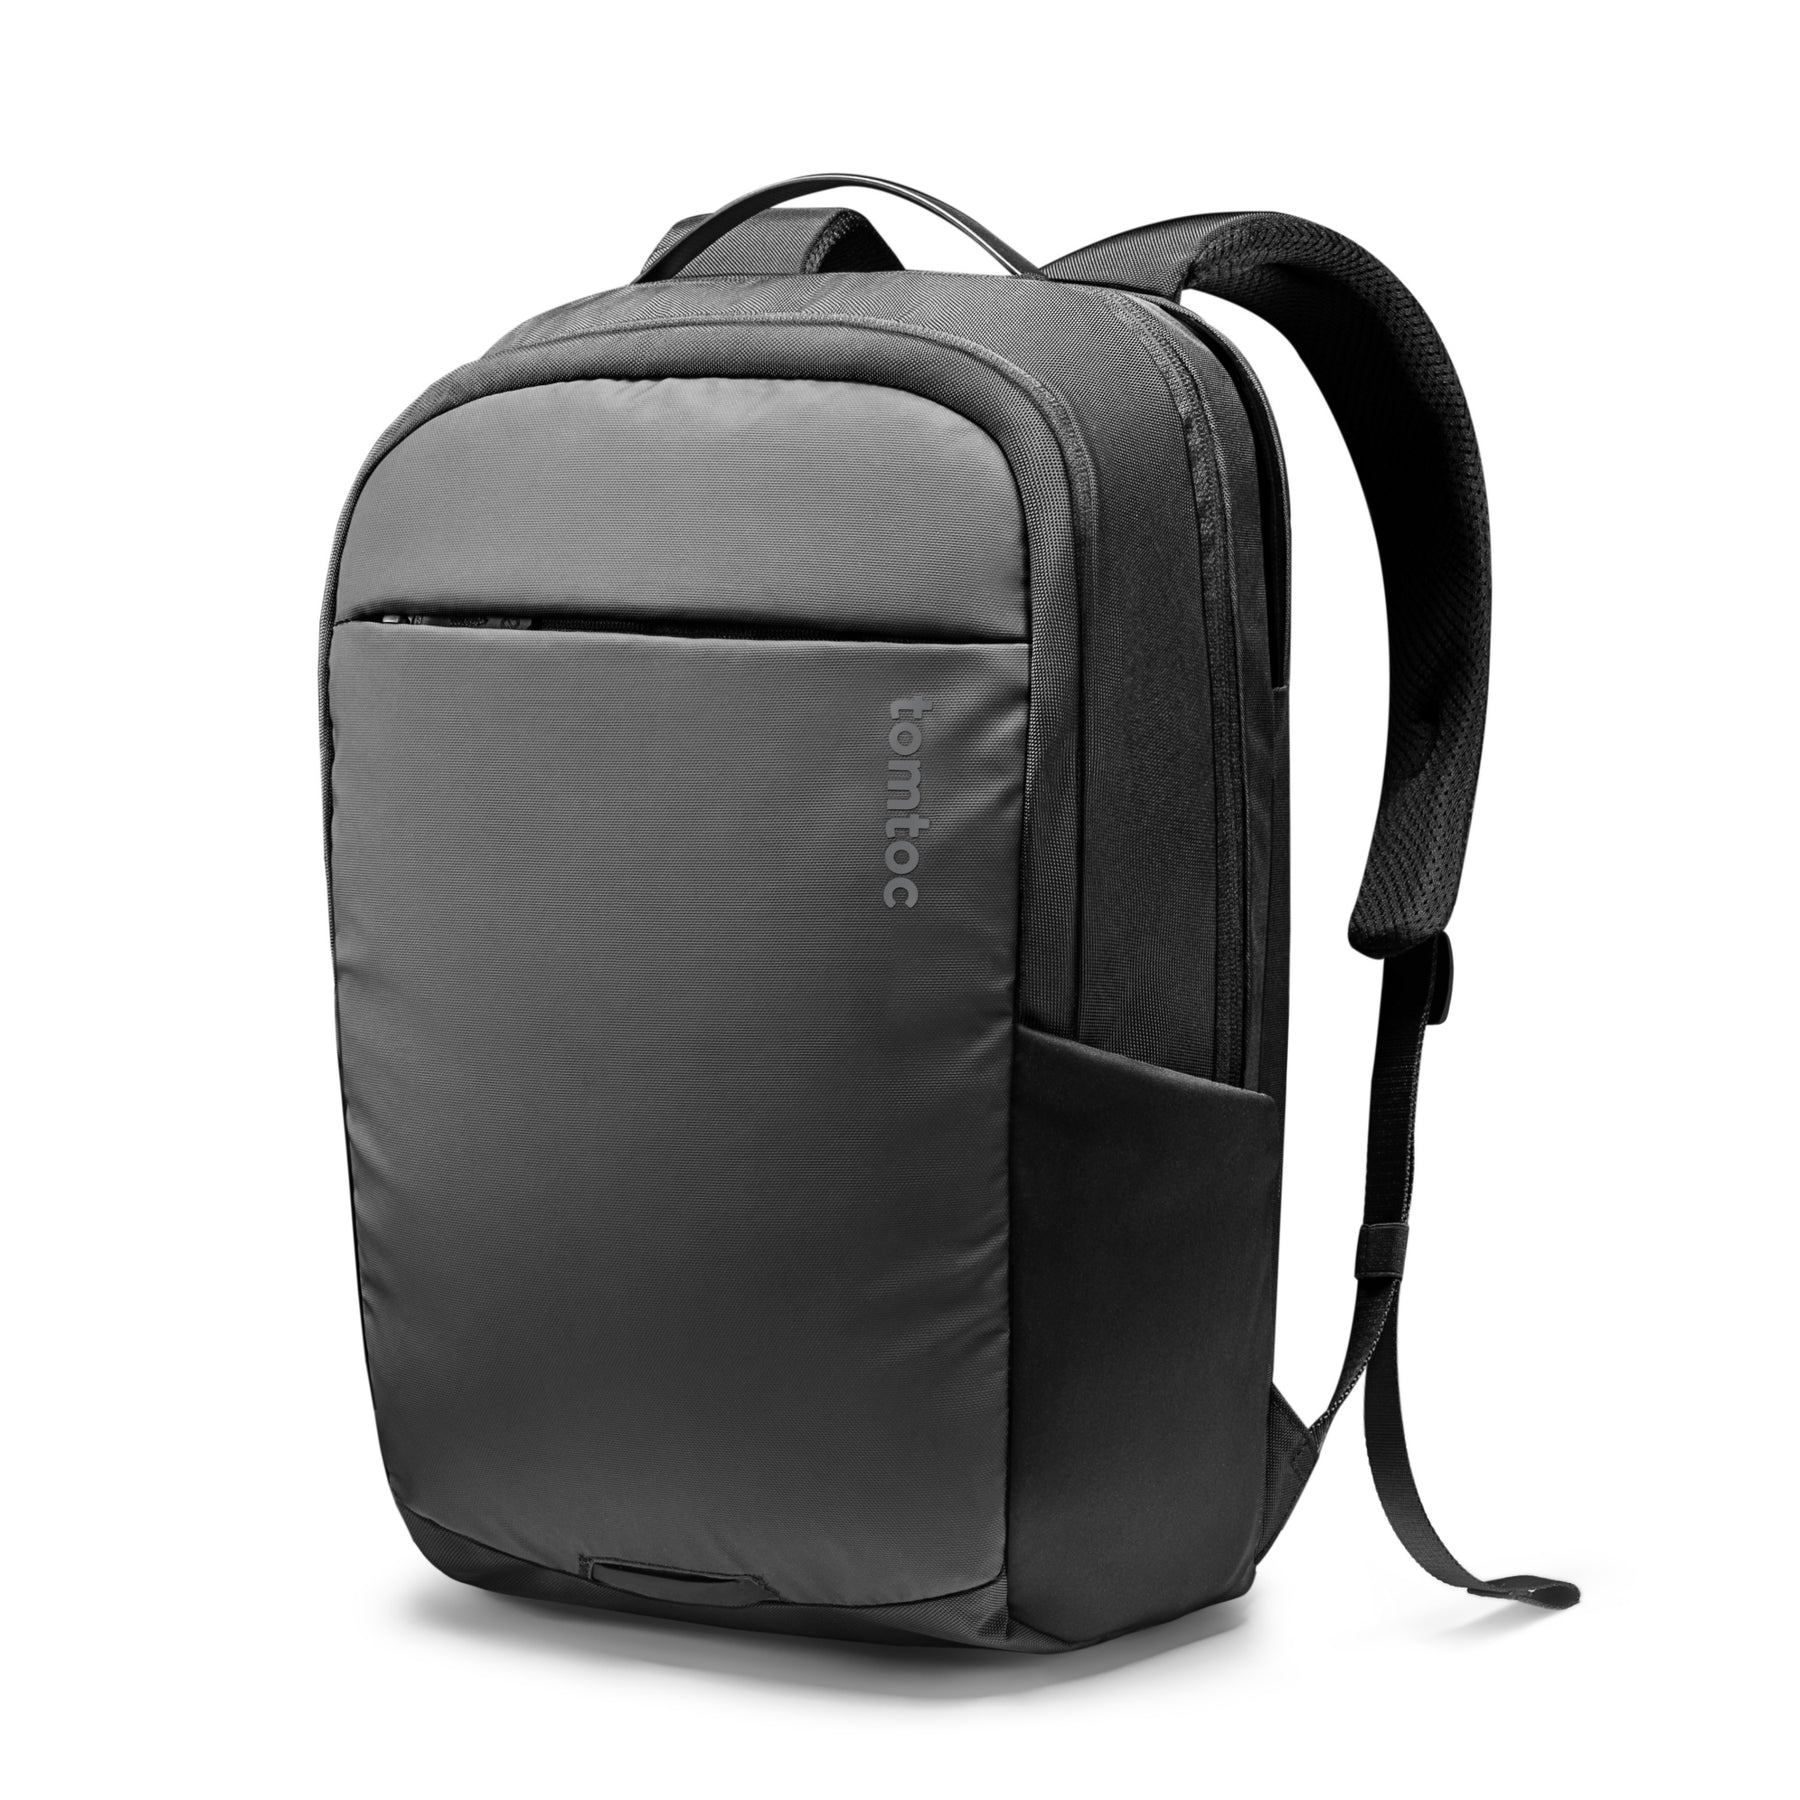 Best Laptop Bag Review In India I Laptop Bags for Men I 14 inch